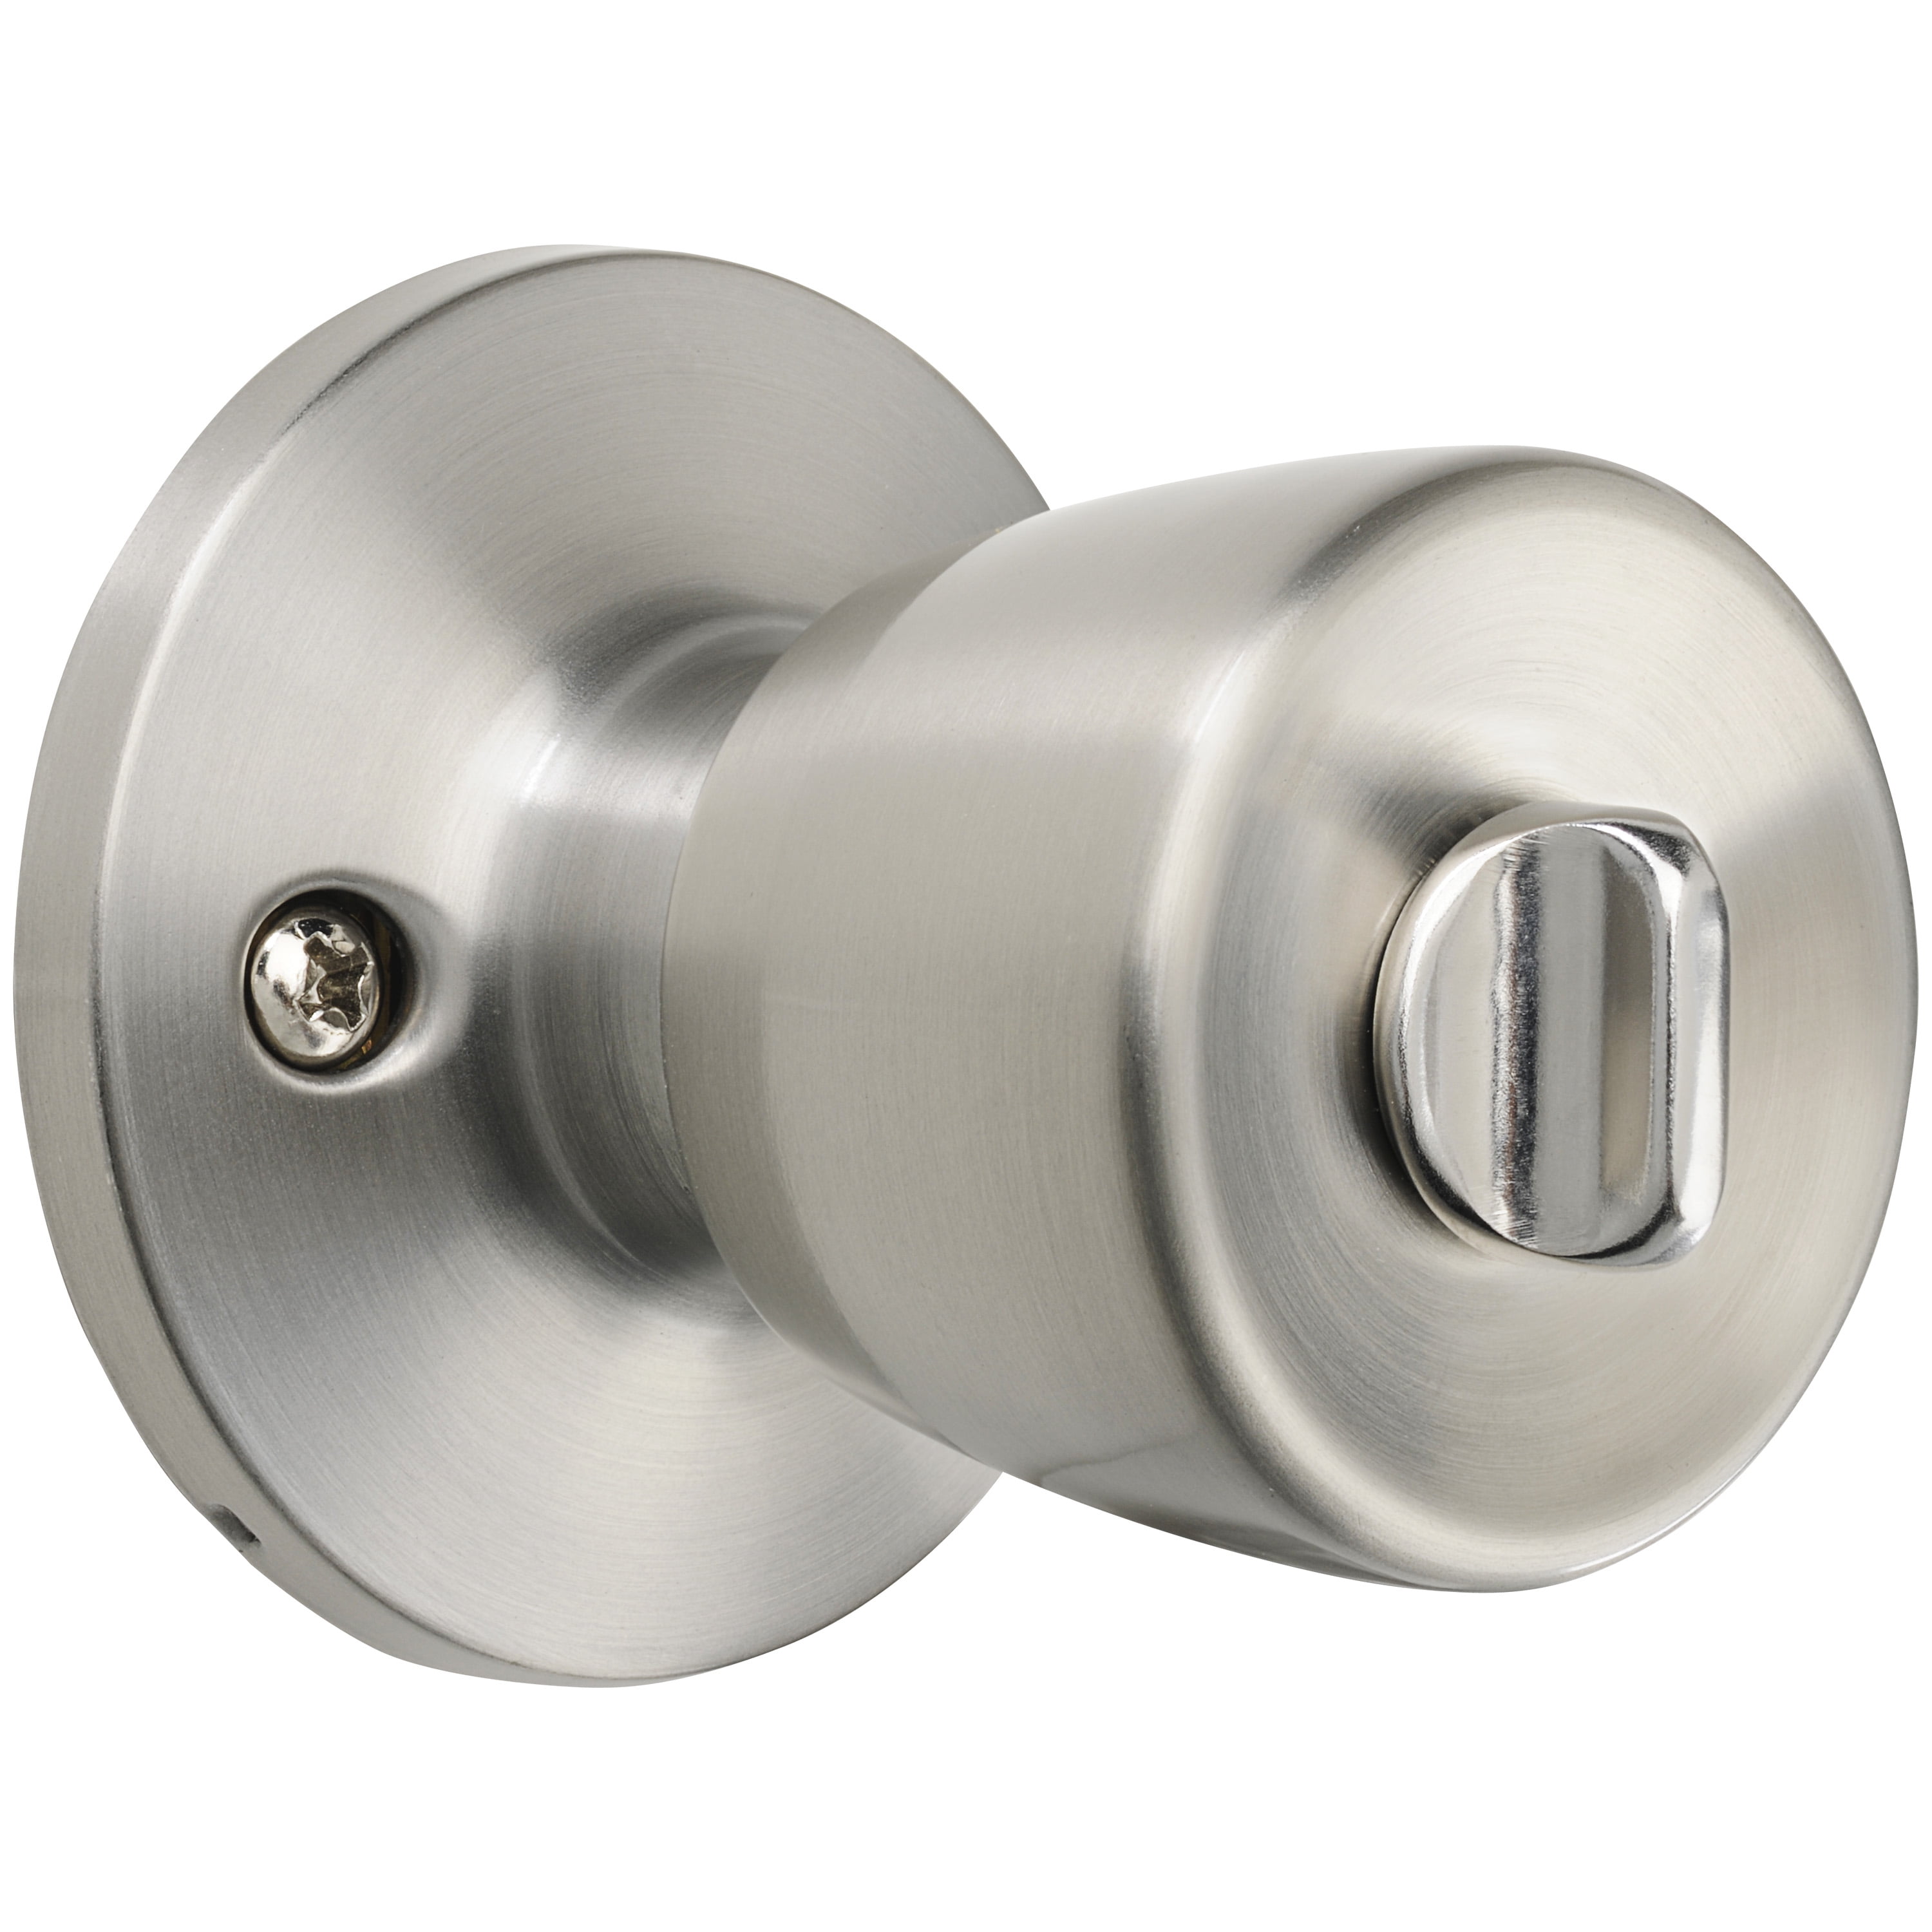 Hyper Tough Interior Privacy Tulip Style Doorknob, Stainless Steel